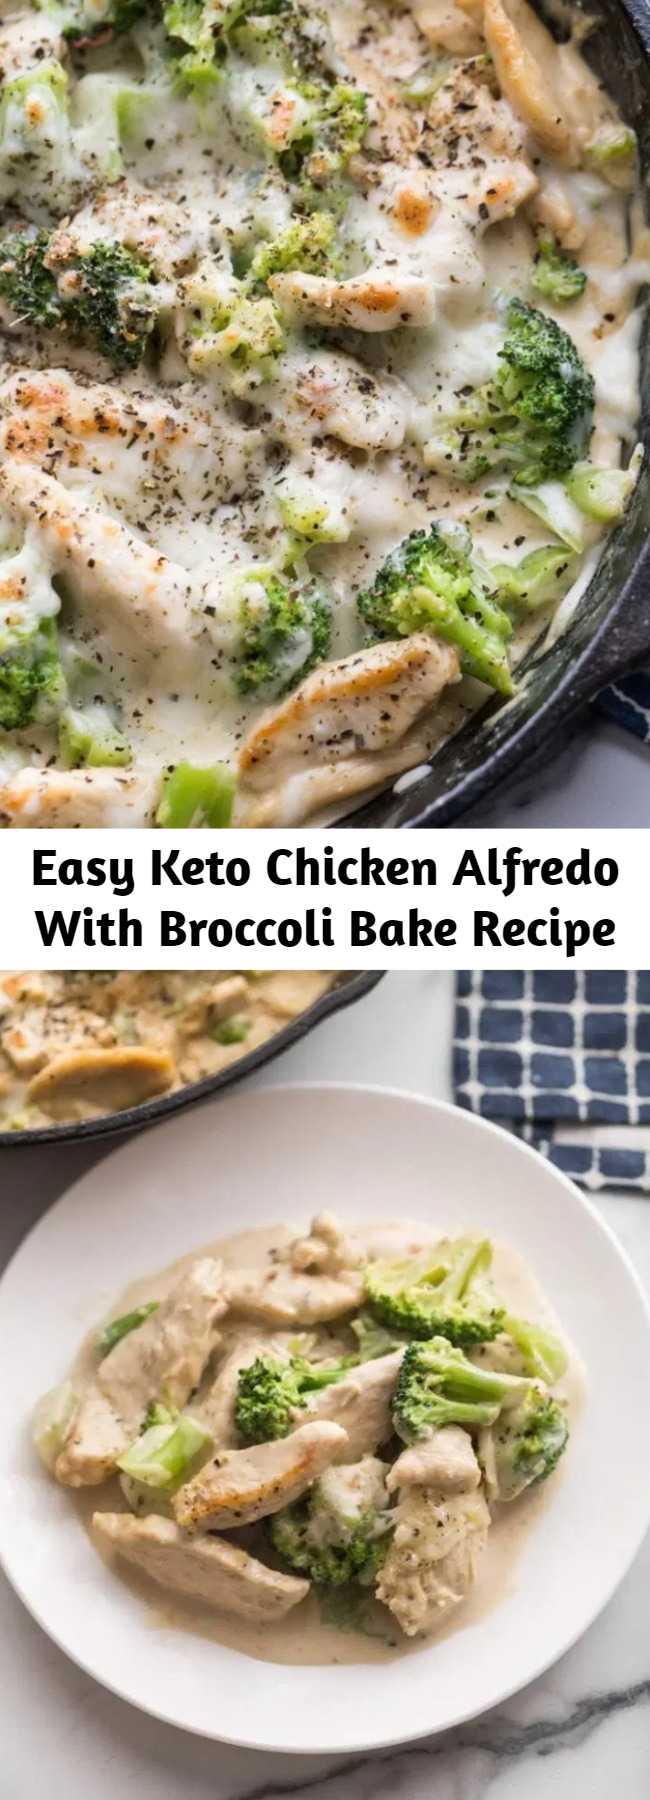 Easy Keto Chicken Alfredo With Broccoli Bake Recipe - If you miss alfredo, look no further. Creamy Keto Chicken Alfredo with Broccoli Bake is the ultimate comfort food that is easy to make, low carb, and delicious. In under 30 minutes, you’ll have a wonderful meal on the table with little effort.